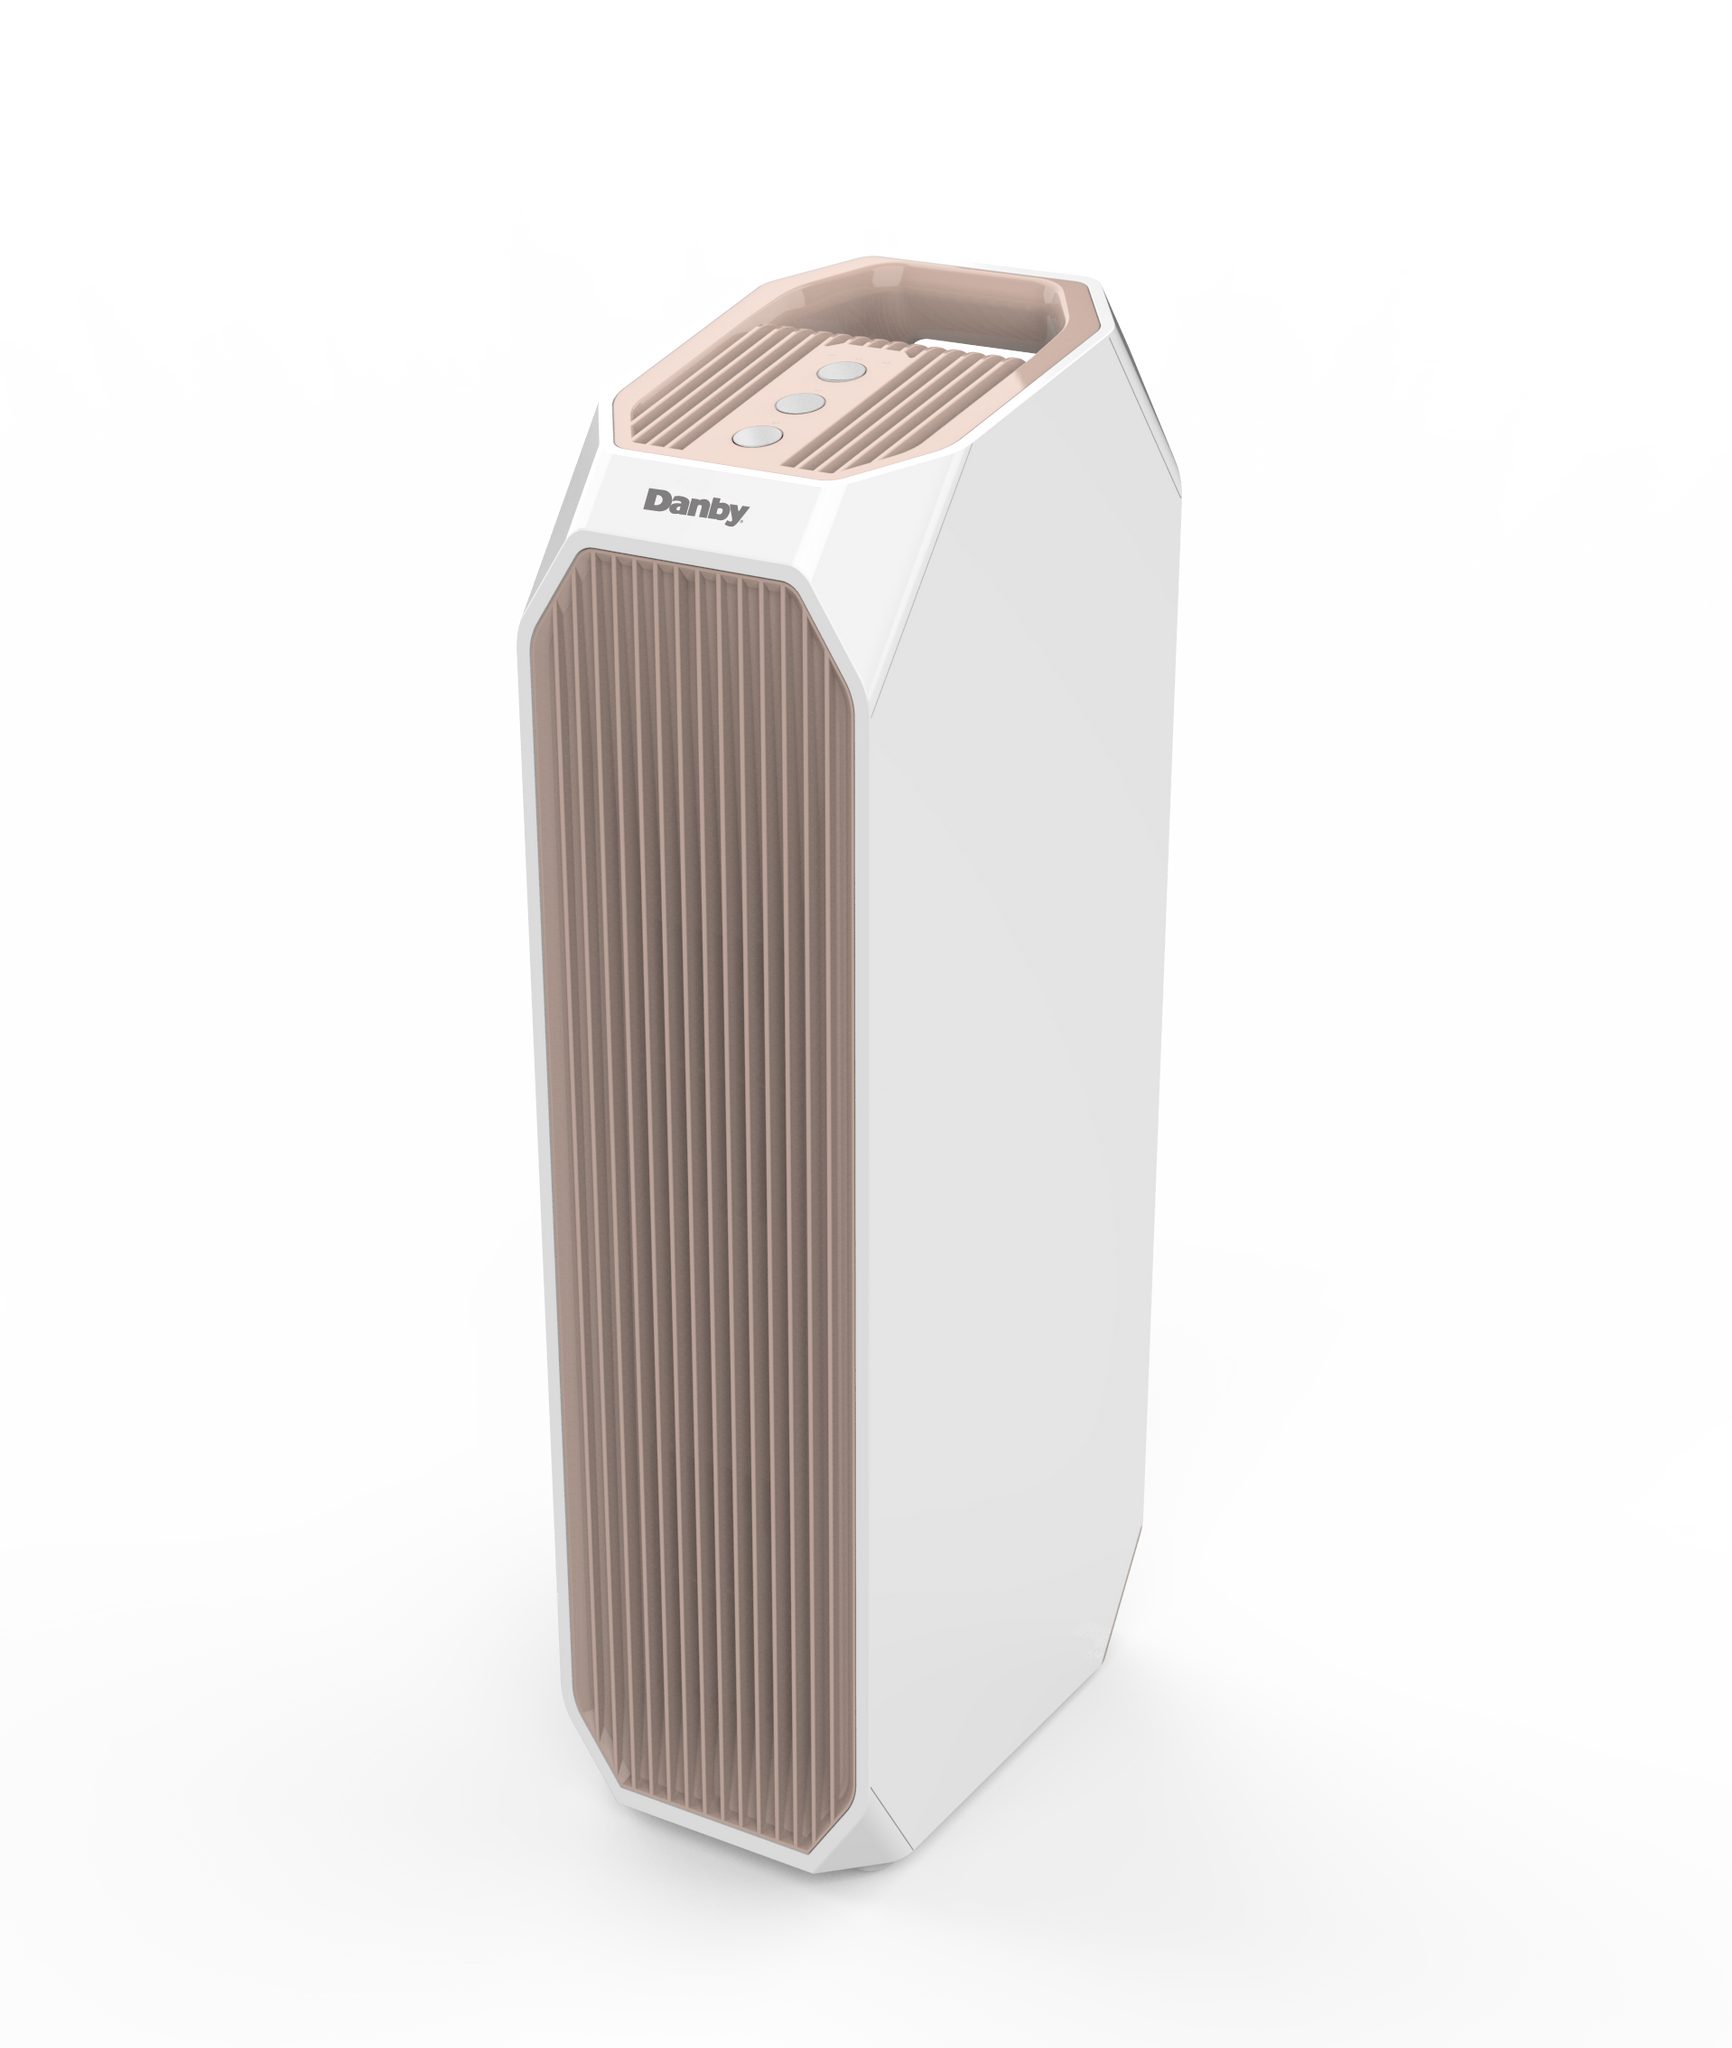 Danby Air Purifier up to 450 sq. ft. in White - DAP290BAW